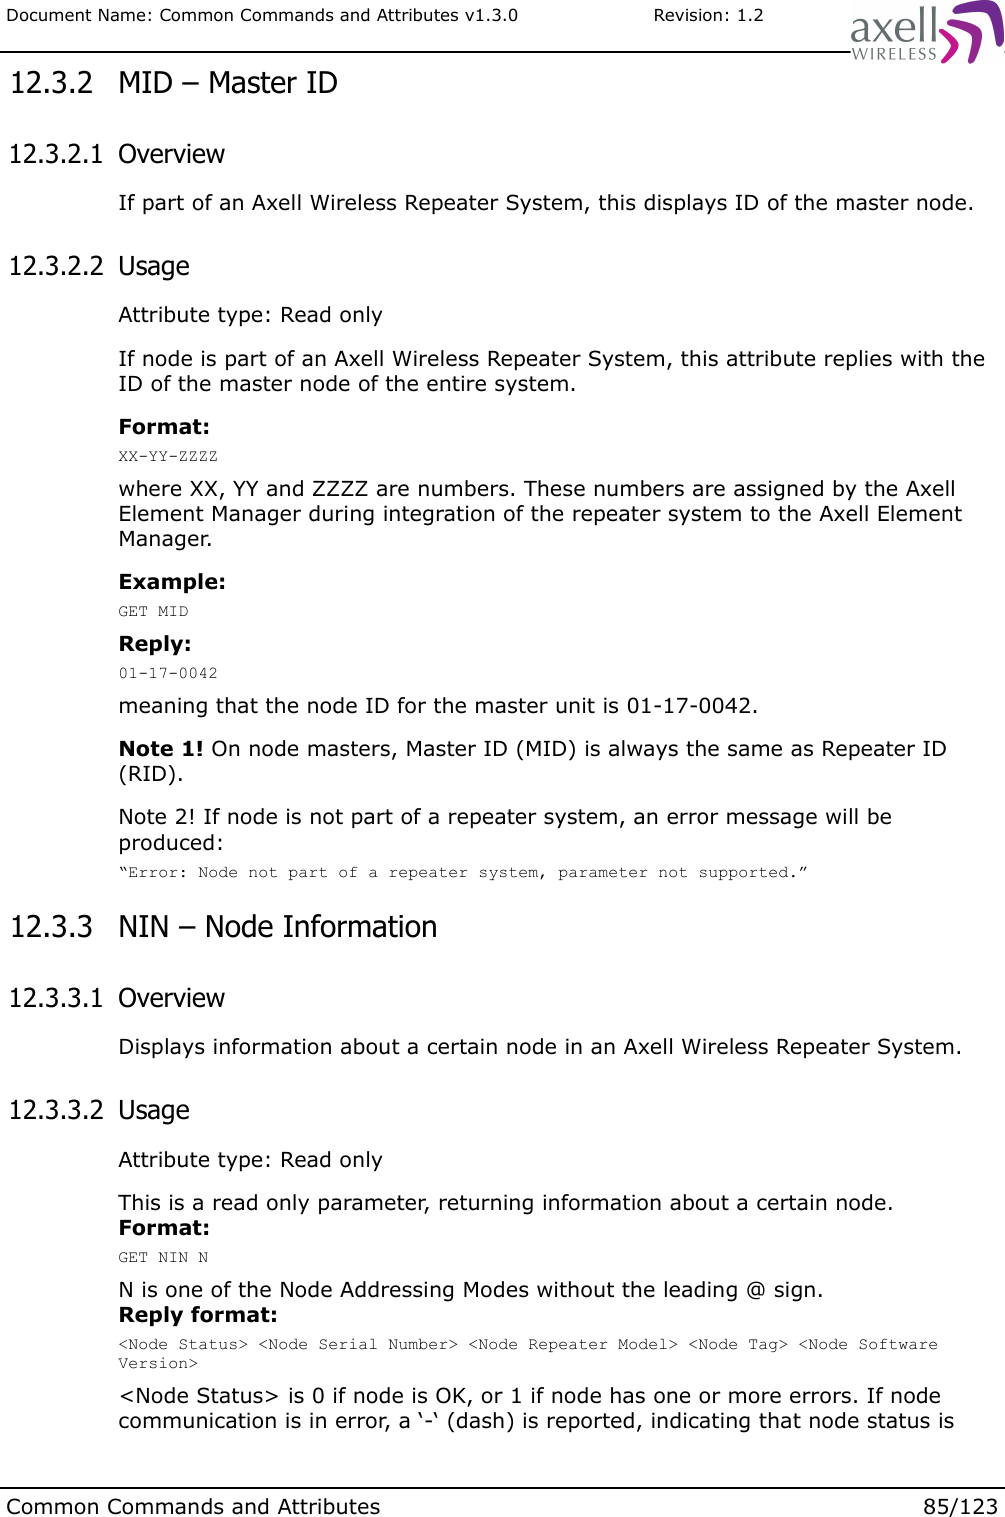 Document Name: Common Commands and Attributes v1.3.0                       Revision: 1.2 12.3.2  MID – Master ID 12.3.2.1  OverviewIf part of an Axell Wireless Repeater System, this displays ID of the master node. 12.3.2.2  UsageAttribute type: Read onlyIf node is part of an Axell Wireless Repeater System, this attribute replies with the ID of the master node of the entire system. Format:XX-YY-ZZZZwhere XX, YY and ZZZZ are numbers. These numbers are assigned by the Axell Element Manager during integration of the repeater system to the Axell Element Manager.Example:GET MIDReply:01-17-0042meaning that the node ID for the master unit is 01-17-0042.Note 1! On node masters, Master ID (MID) is always the same as Repeater ID (RID).Note 2! If node is not part of a repeater system, an error message will be produced:“Error: Node not part of a repeater system, parameter not supported.” 12.3.3  NIN – Node Information 12.3.3.1  OverviewDisplays information about a certain node in an Axell Wireless Repeater System. 12.3.3.2  UsageAttribute type: Read onlyThis is a read only parameter, returning information about a certain node.Format:GET NIN NN is one of the Node Addressing Modes without the leading @ sign.Reply format:&lt;Node Status&gt; &lt;Node Serial Number&gt; &lt;Node Repeater Model&gt; &lt;Node Tag&gt; &lt;Node Software Version&gt;&lt;Node Status&gt; is 0 if node is OK, or 1 if node has one or more errors. If node communication is in error, a ‘-‘ (dash) is reported, indicating that node status is Common Commands and Attributes 85/123